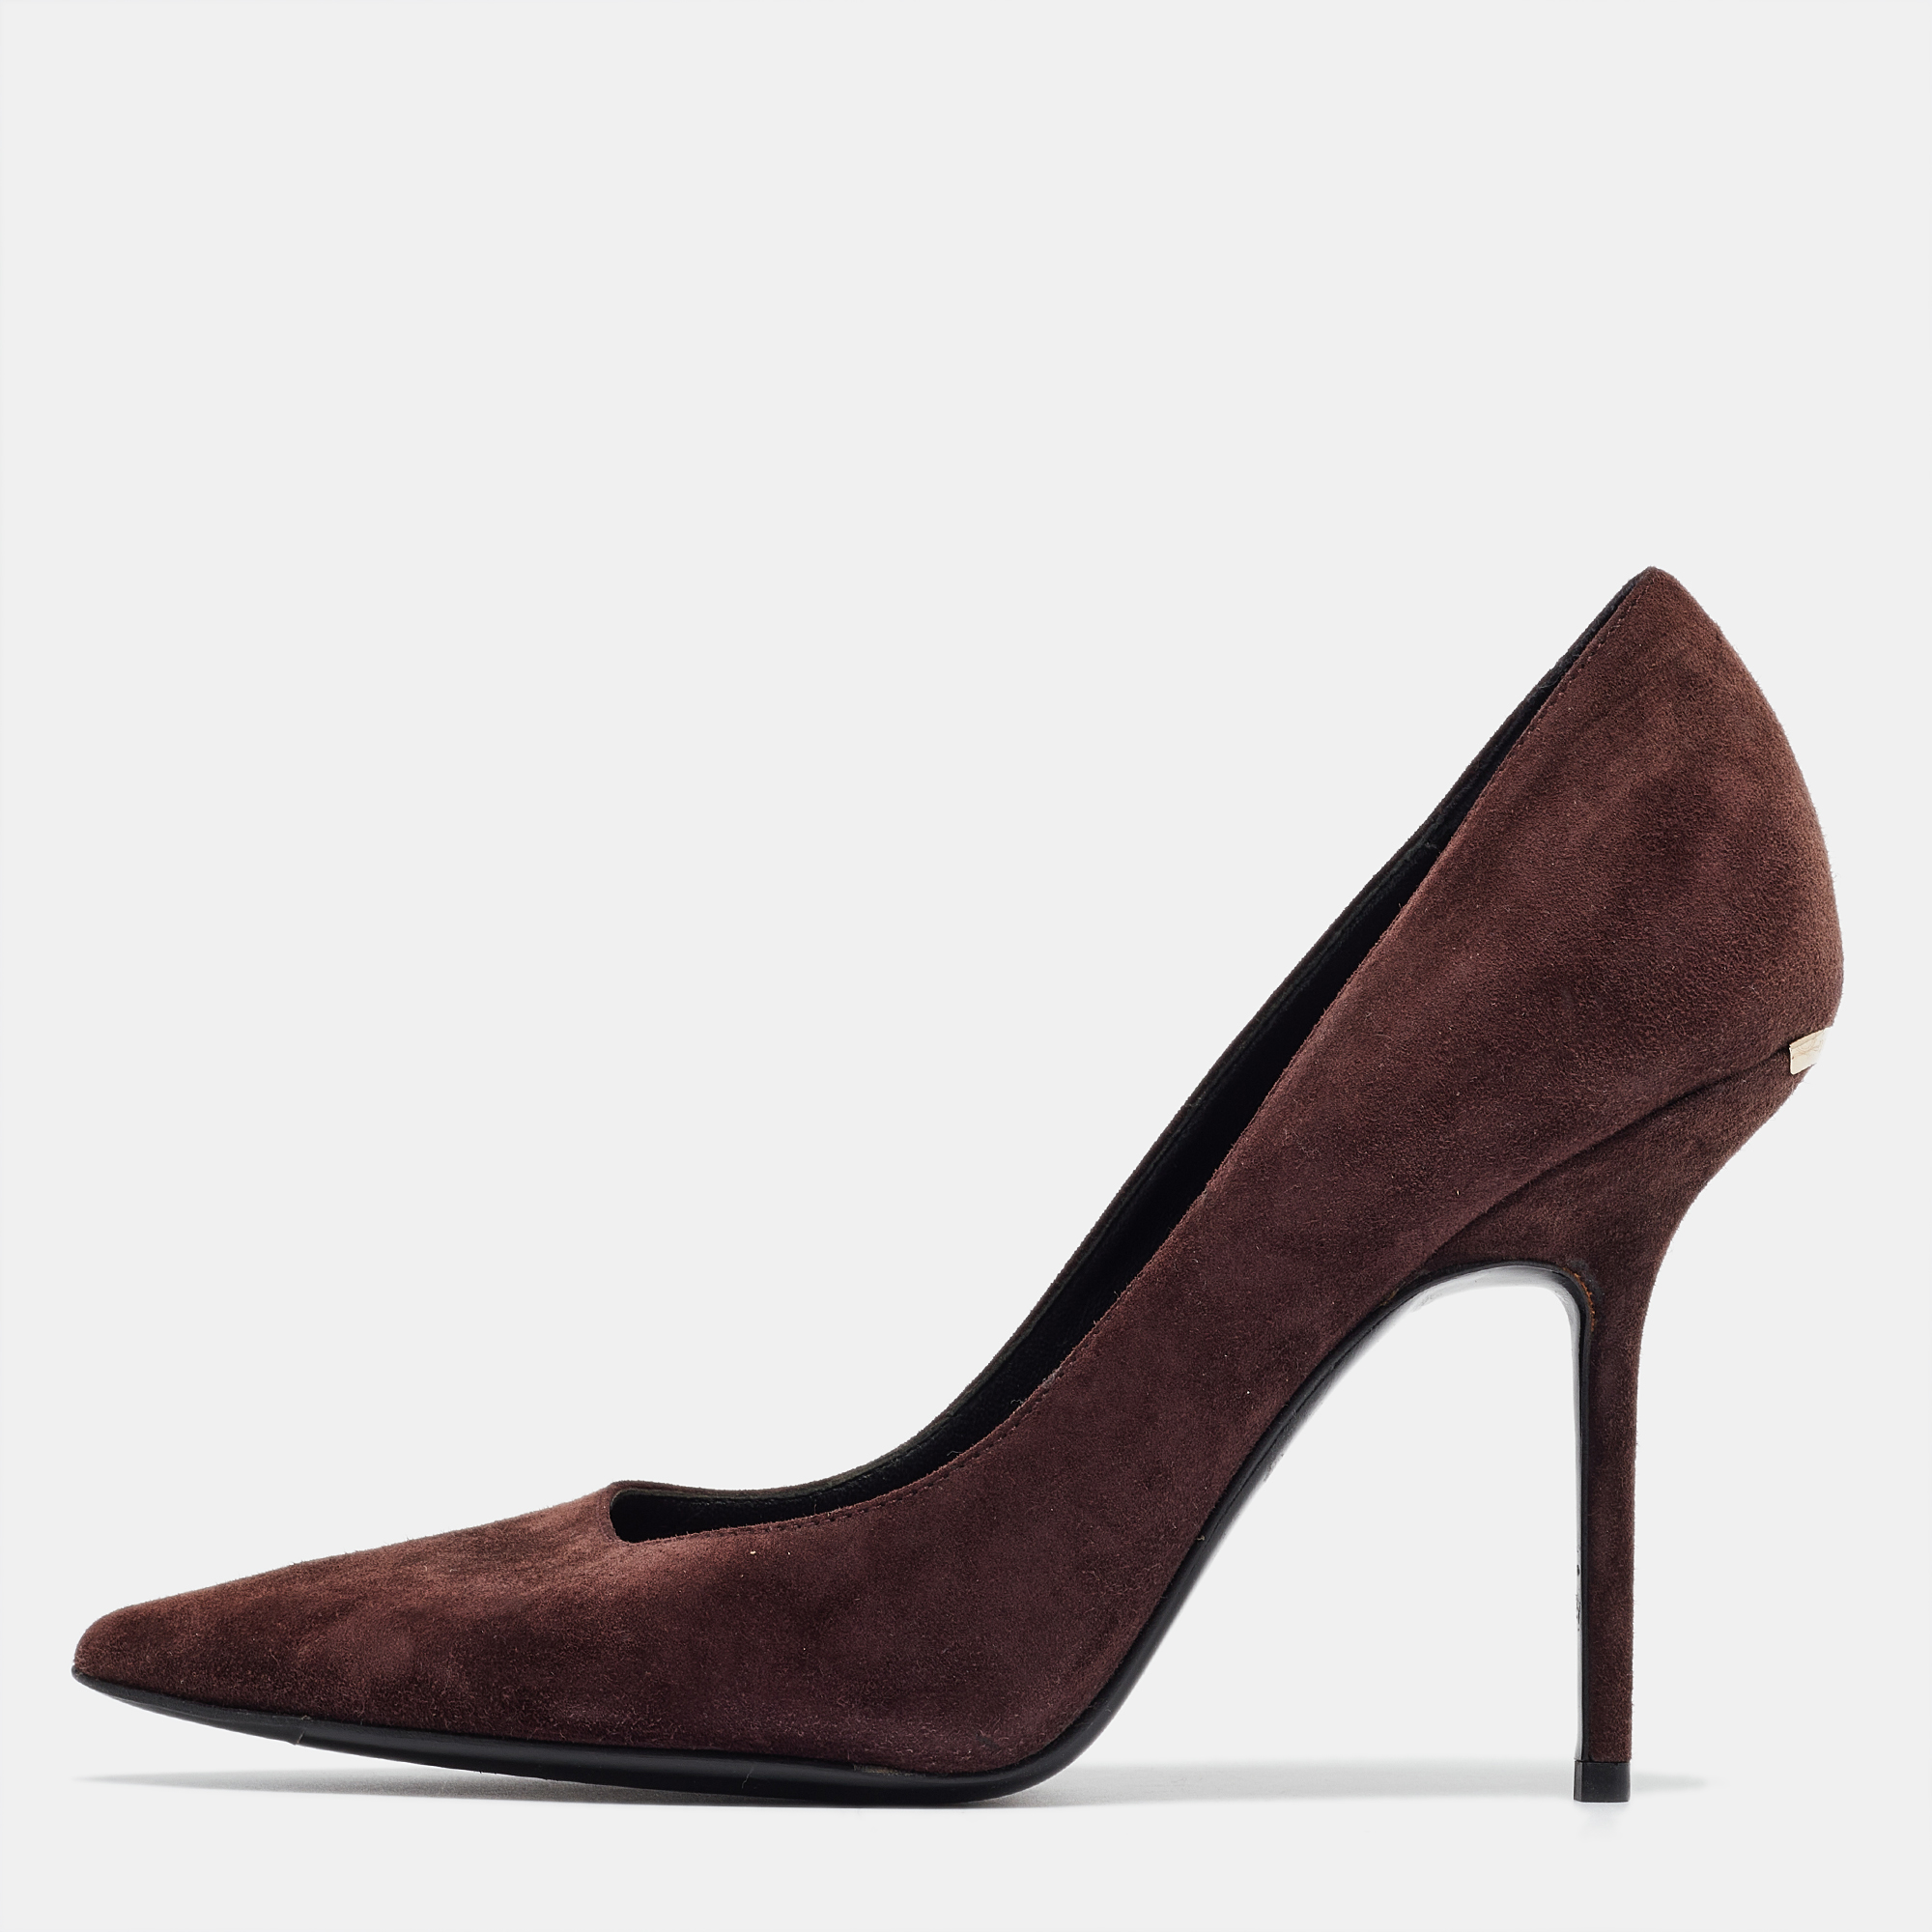 Burberry burgundy suede mawdesley pointed toe pumps size 39